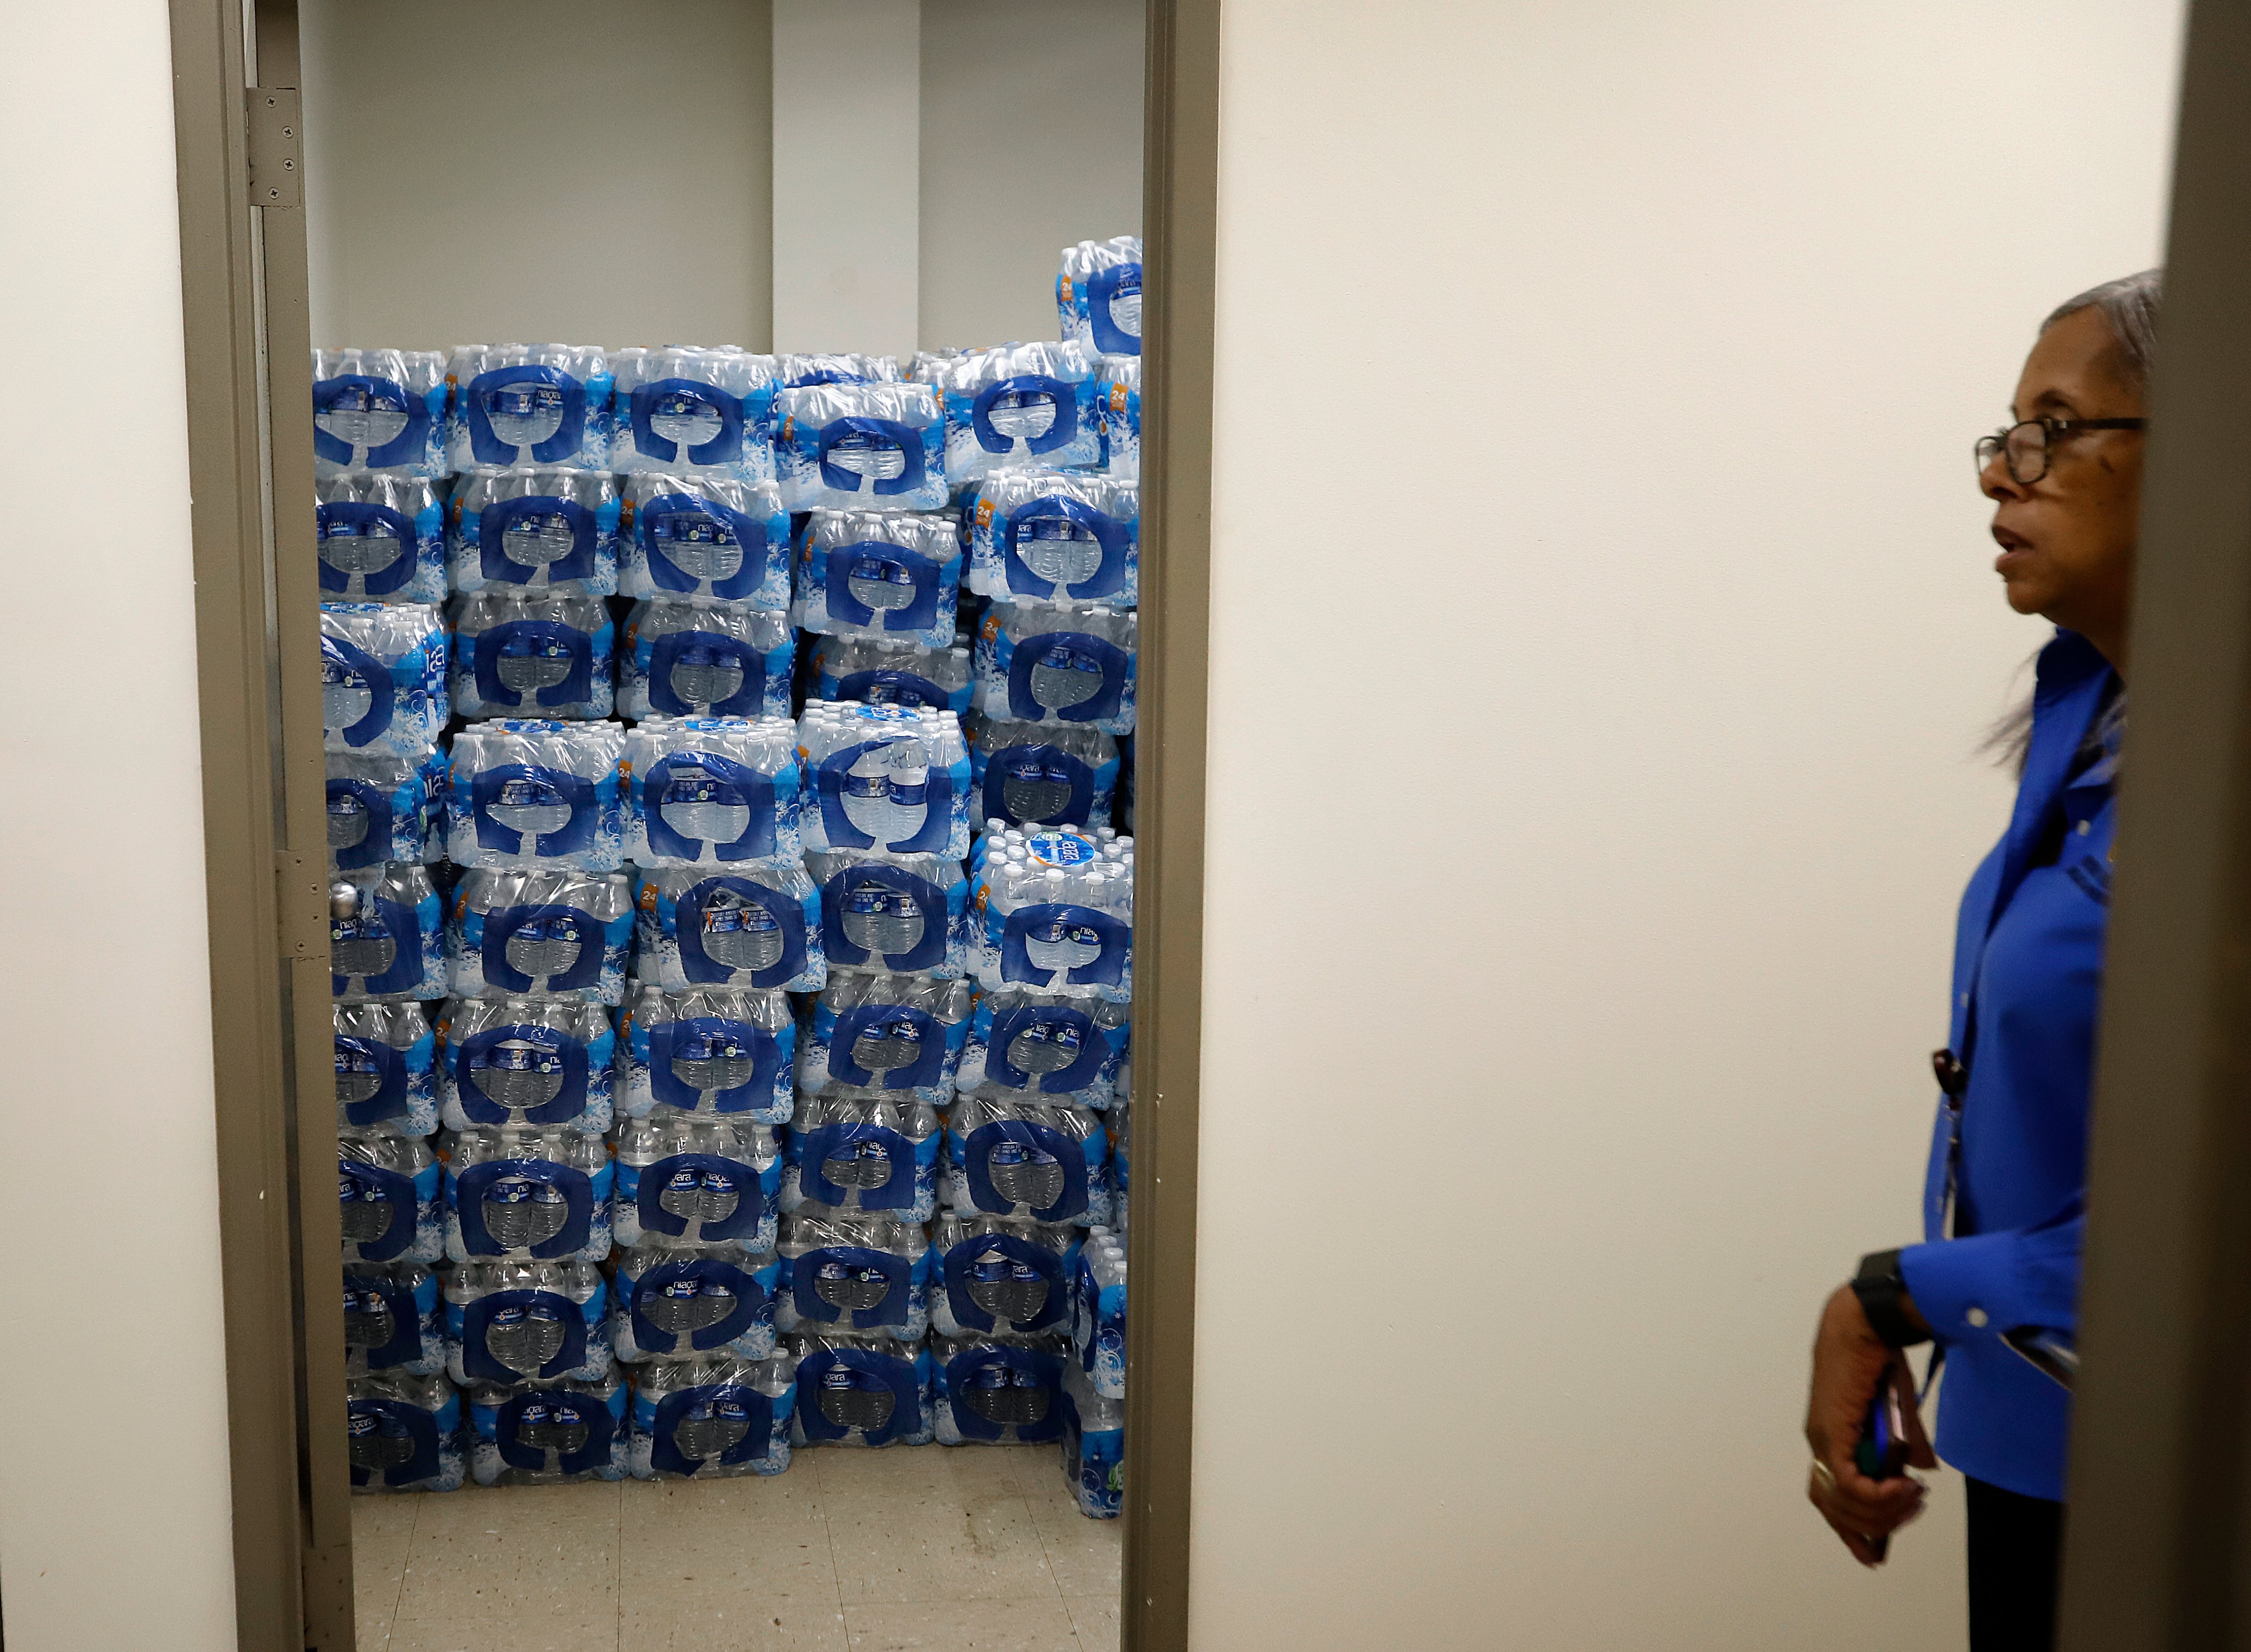 City Of Newark Distributes Bottled Water After High Levels Of Lead Found In Tap Water